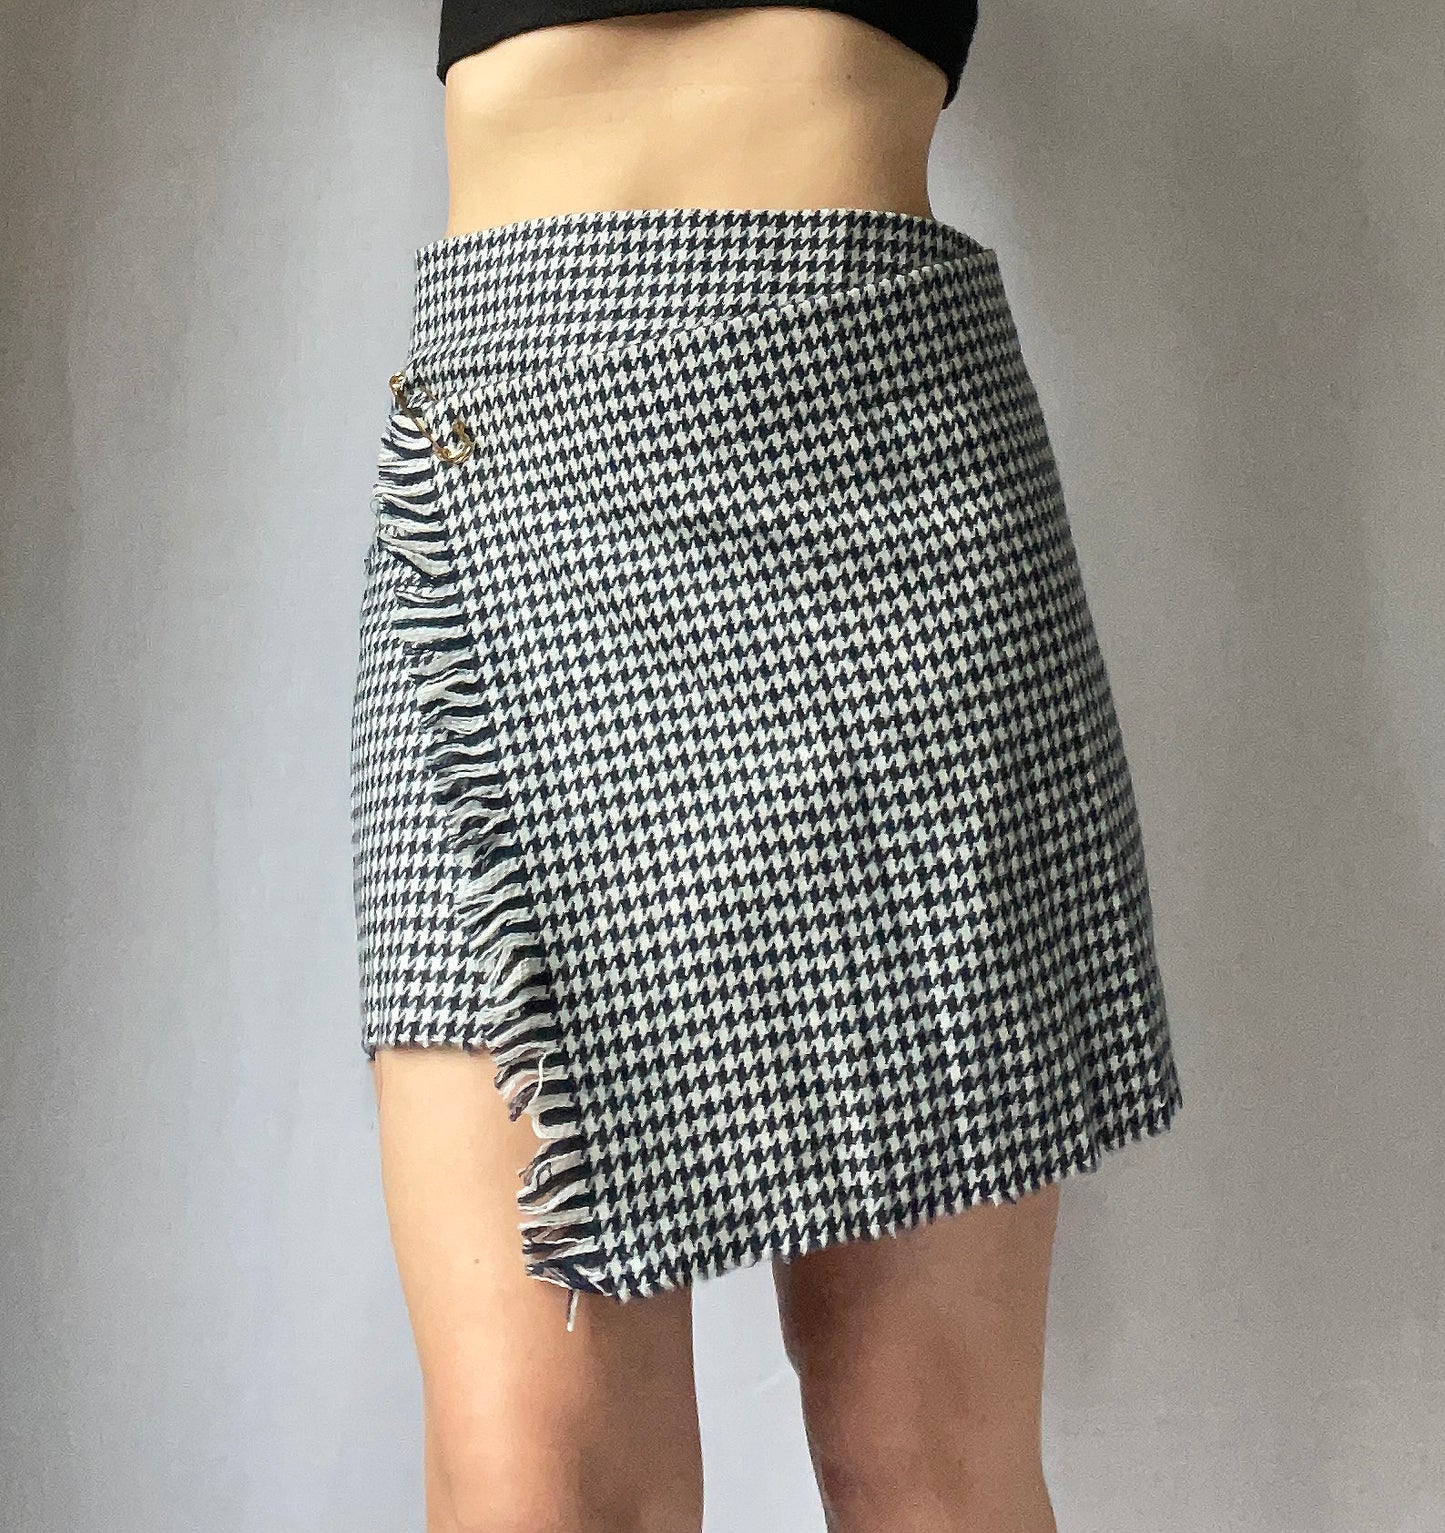 Vintage Wool Wrap Skirt With Safety Pin Closure